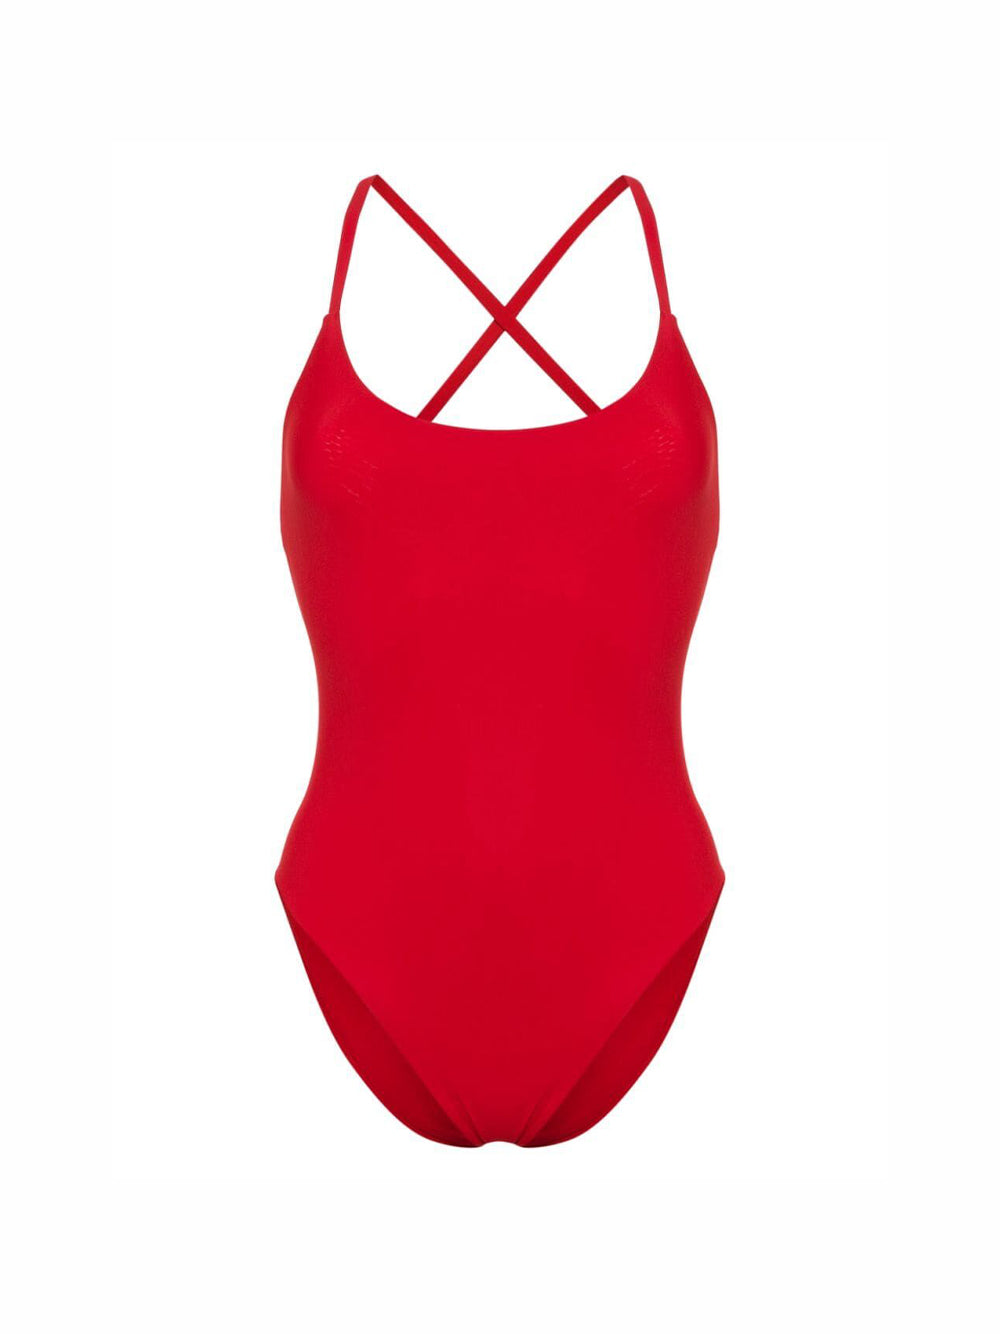 Red Uno one-piece cross back swimsuit